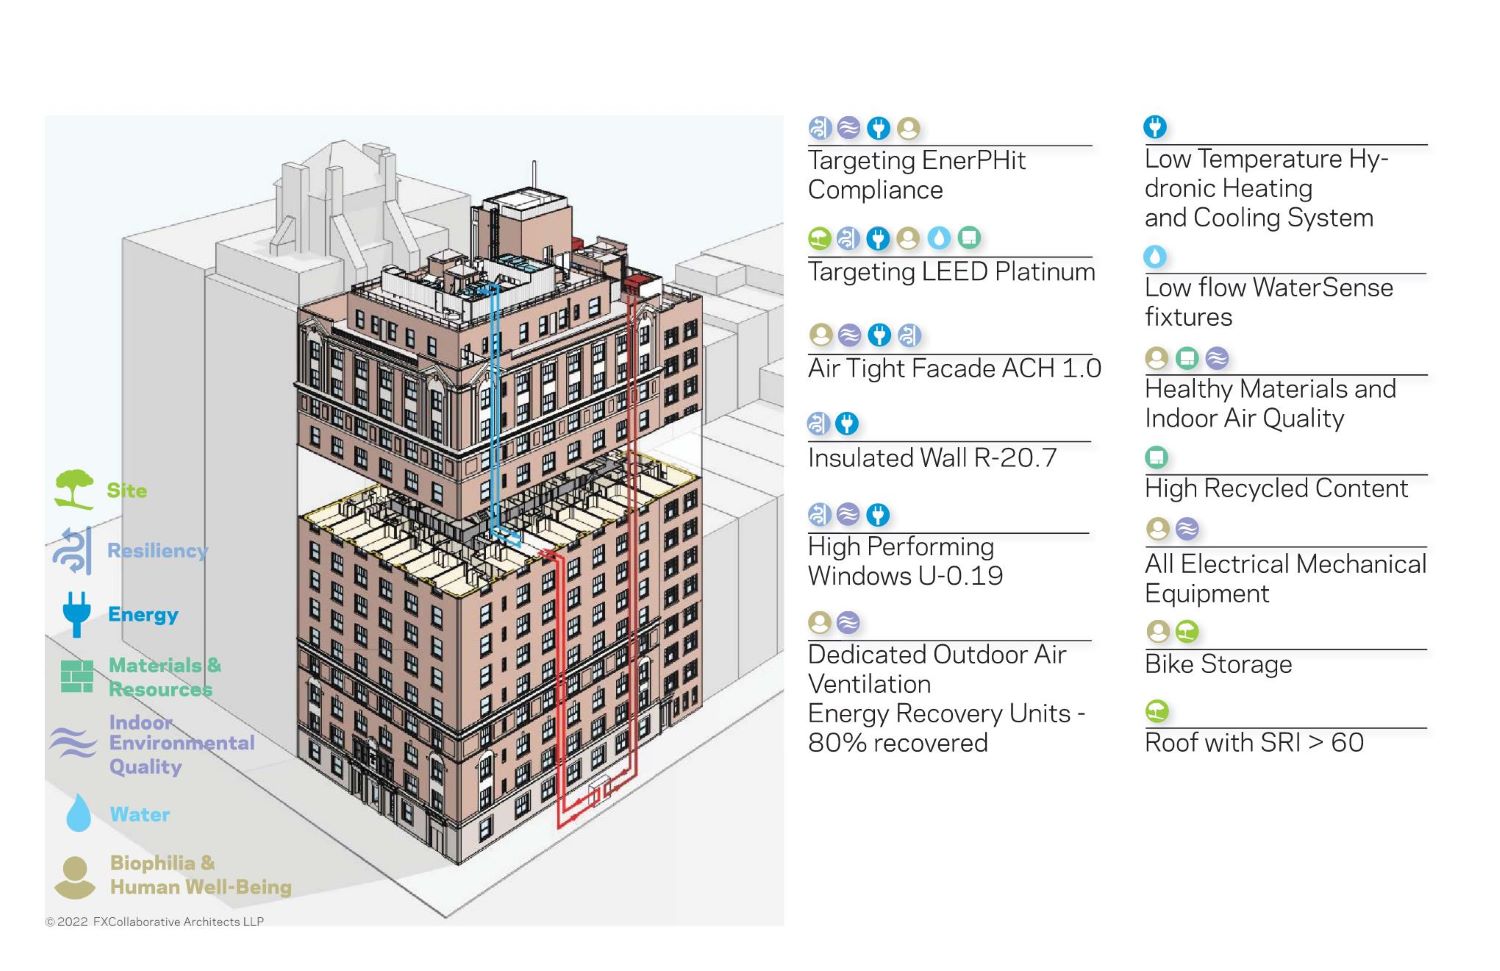 Image of building with example of EnerPhit classifications for compliance.